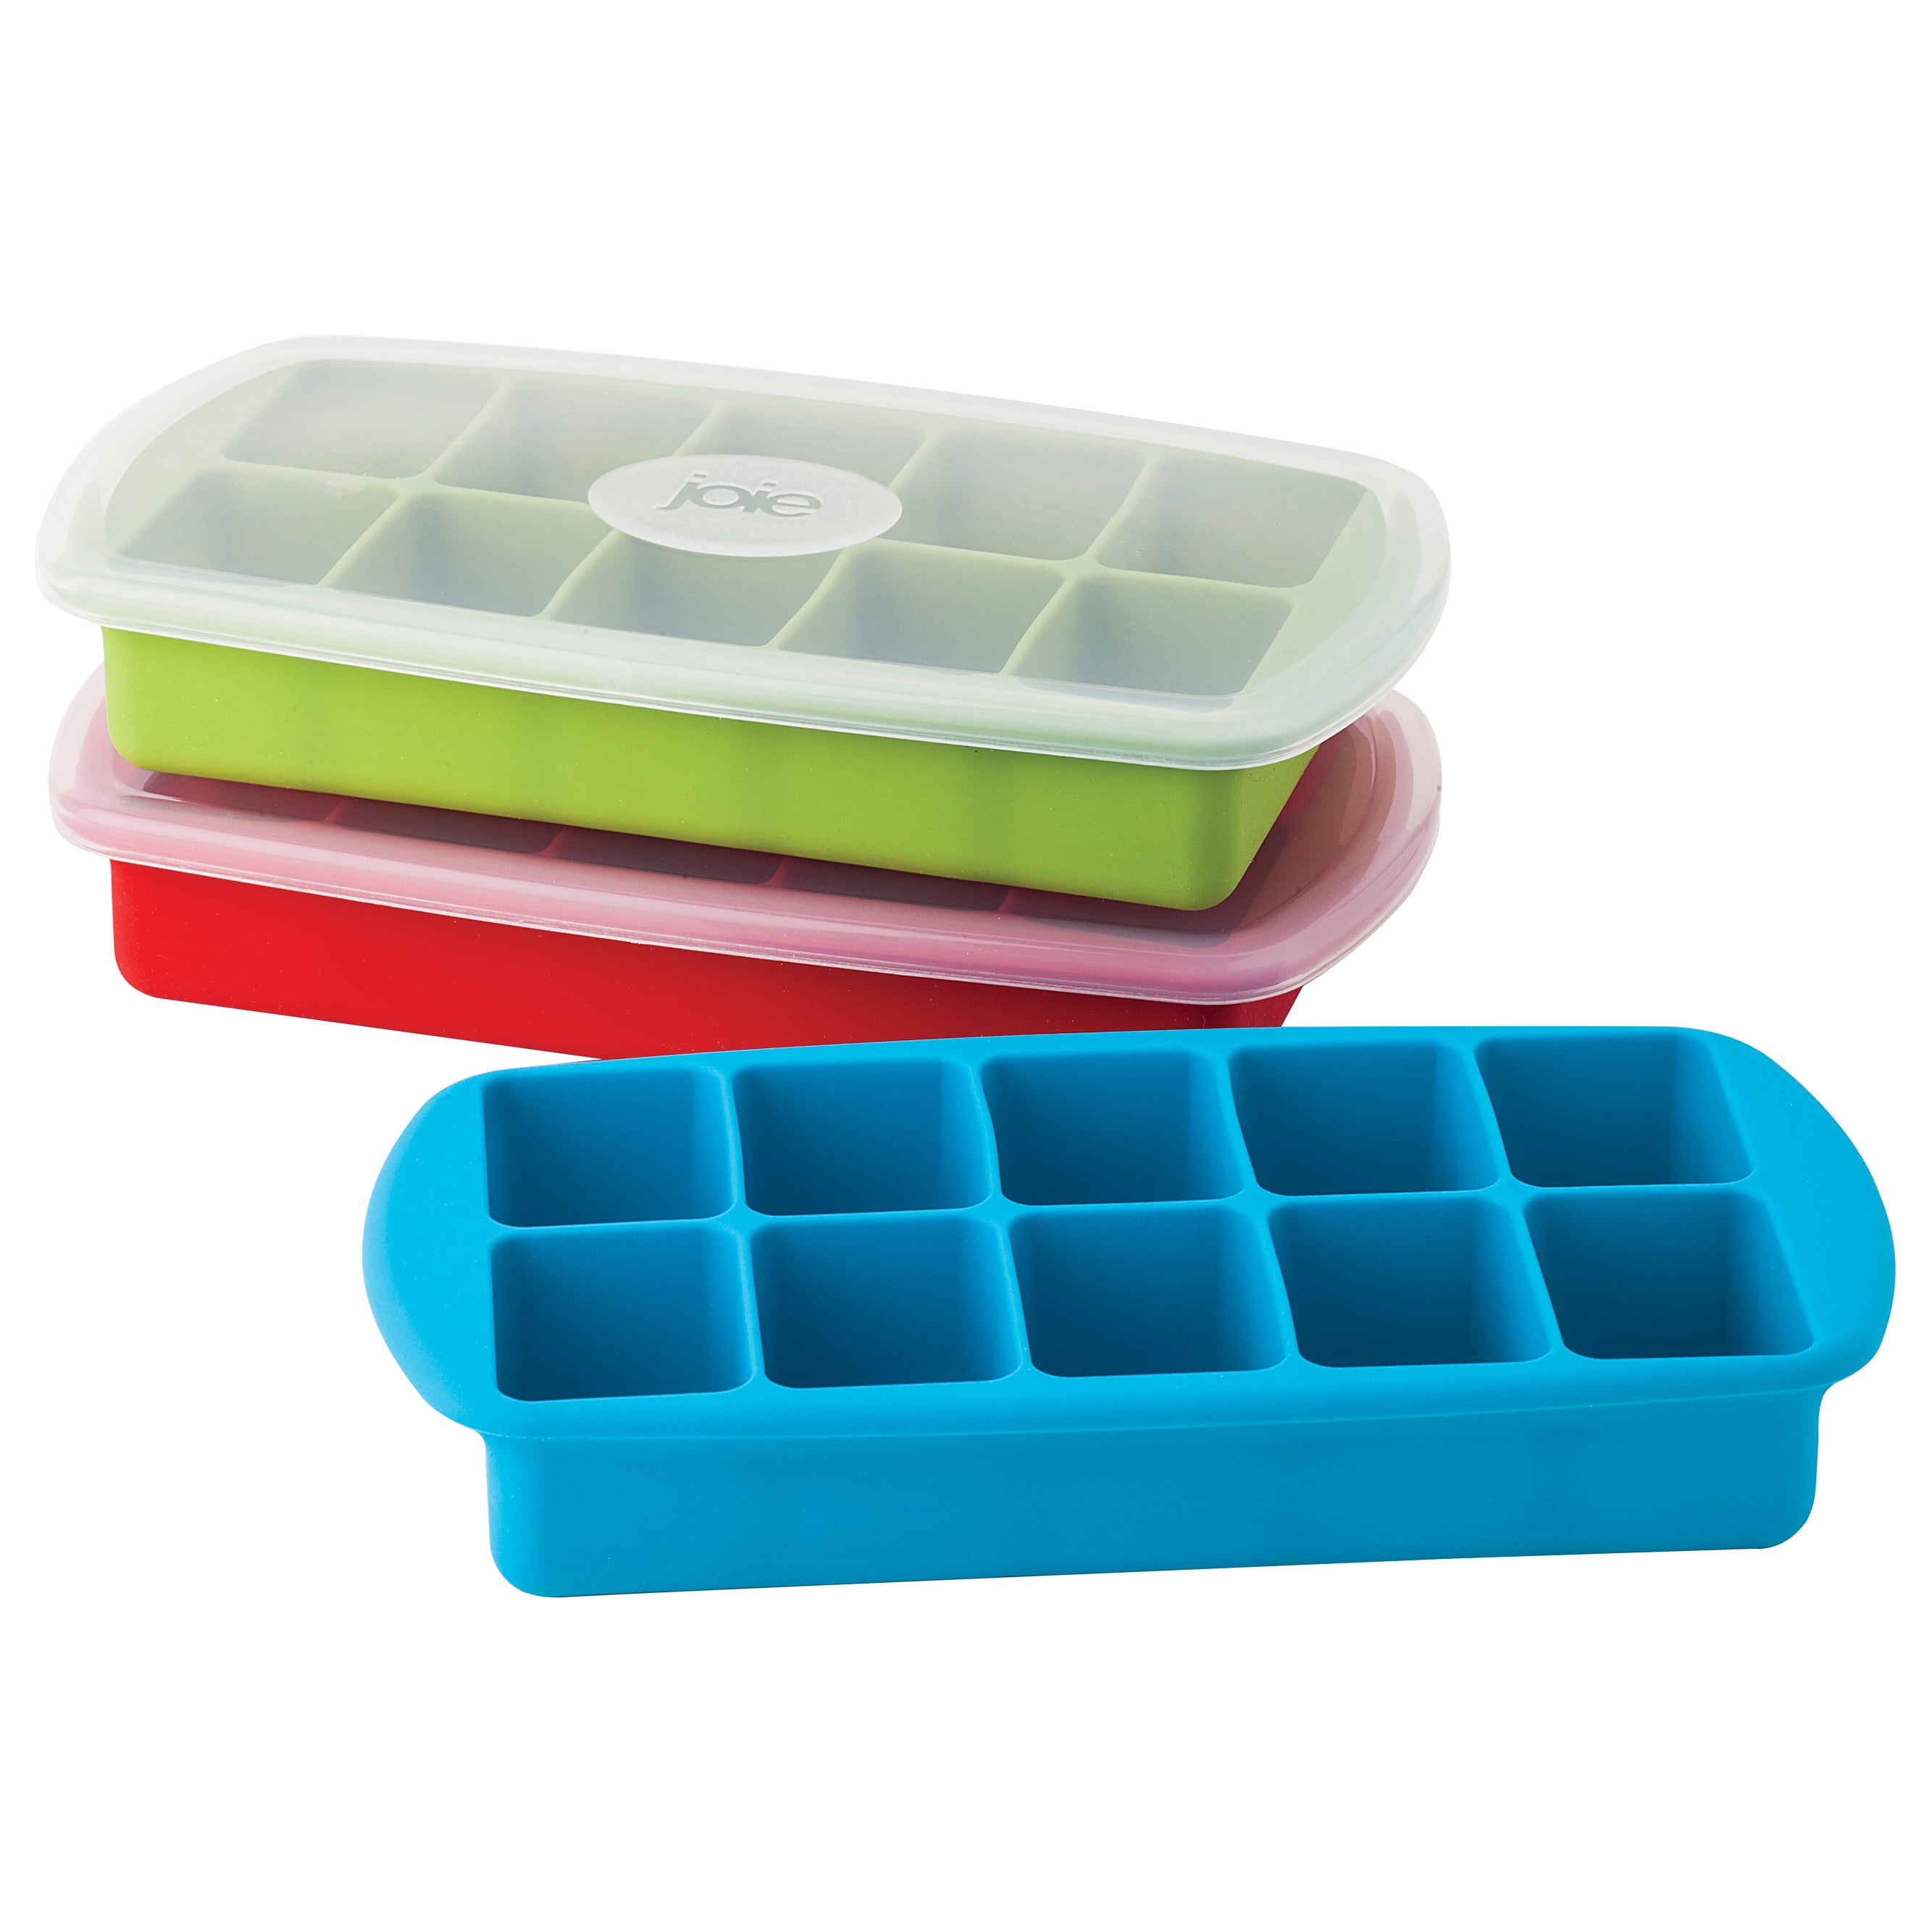  Joie Mini Ice Cube Tray with Lid and Flip & Fill Tabs, Assorted  Colors (8541983721) : Home & Kitchen